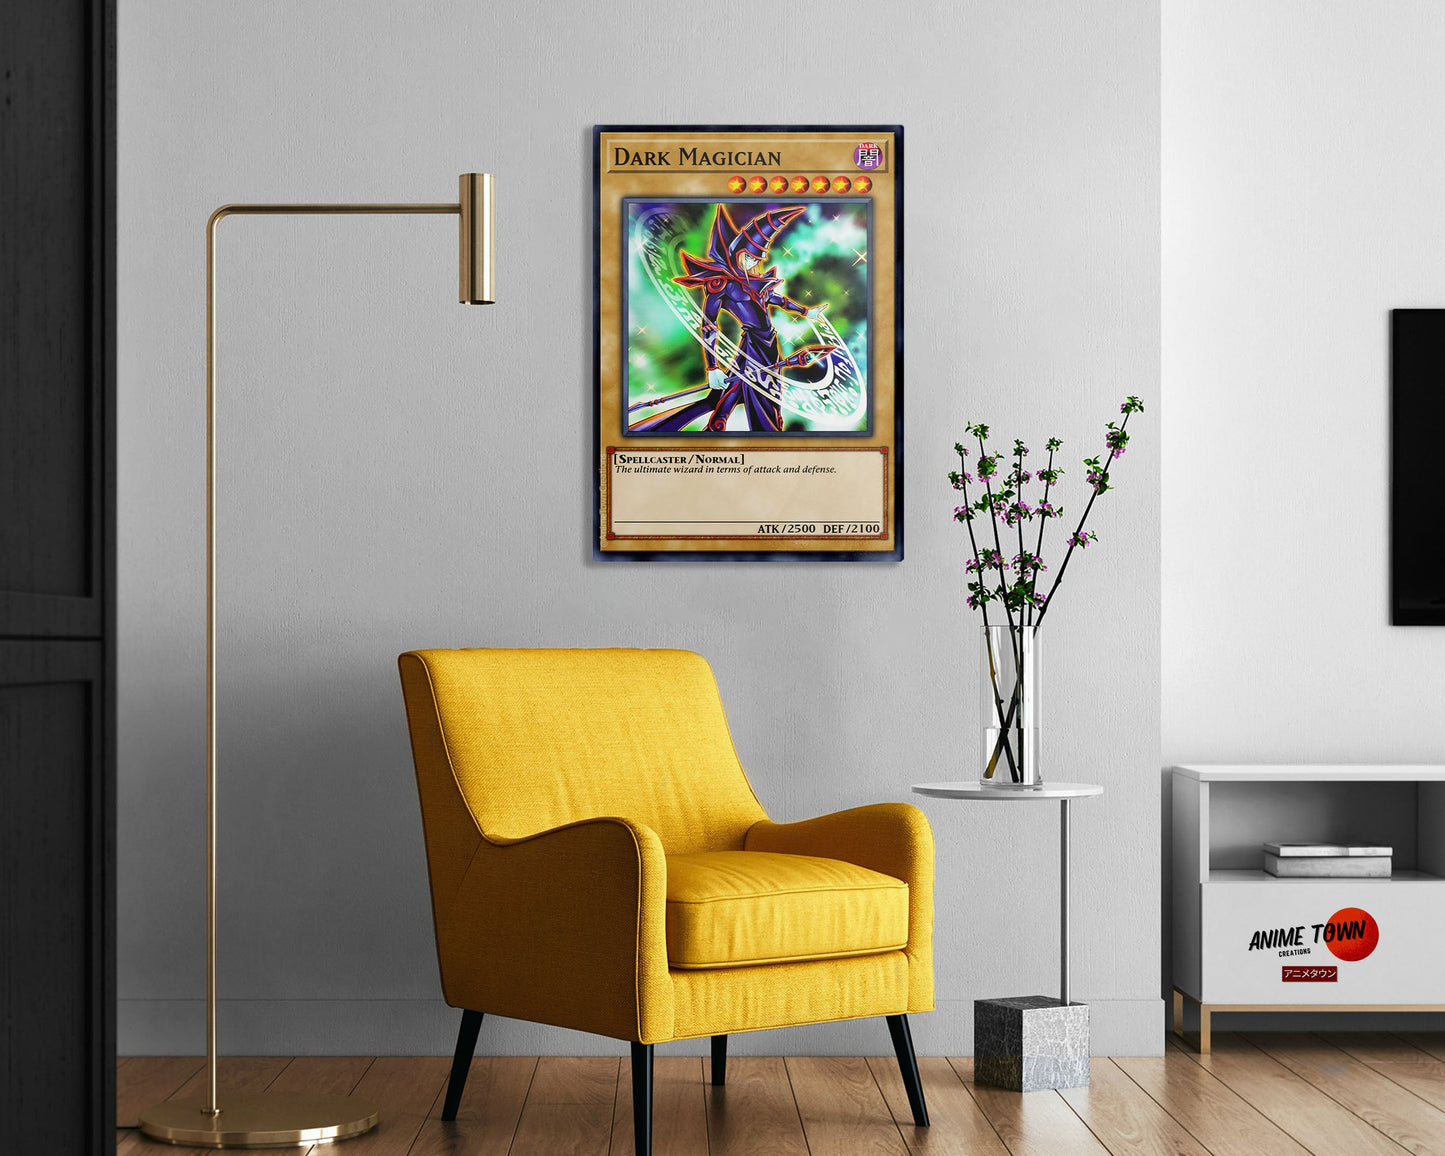 Anime Town Creations Metal Poster Yugioh Dark Magician 1st Edition Card 24" x 36" Home Goods - Anime Yu-Gi-Oh Metal Poster